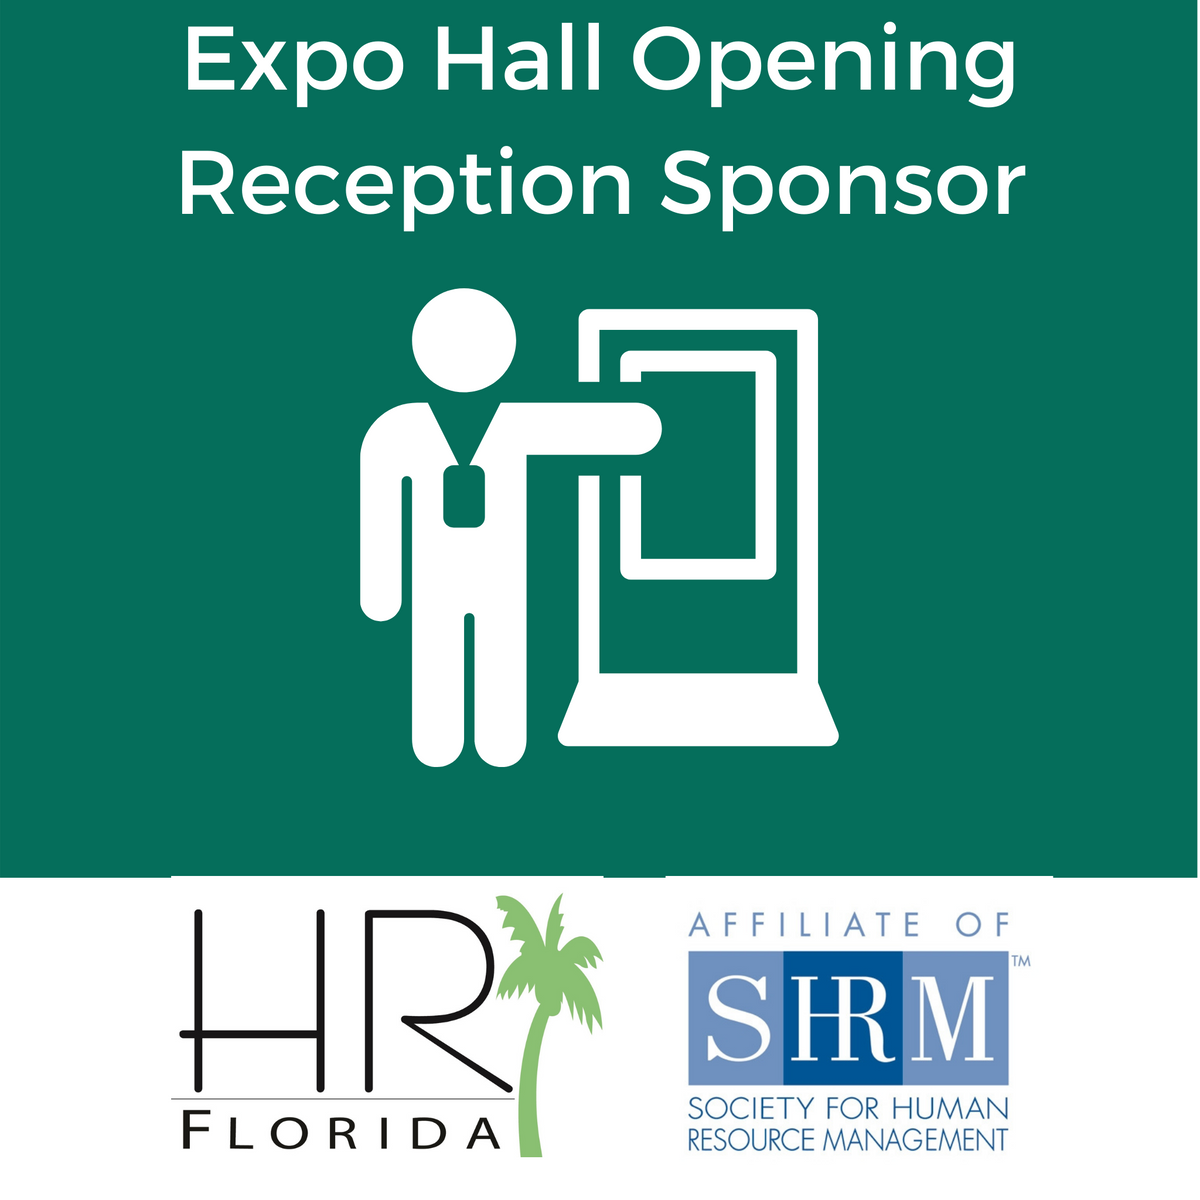 Expo Hall Opening Reception Sponsor